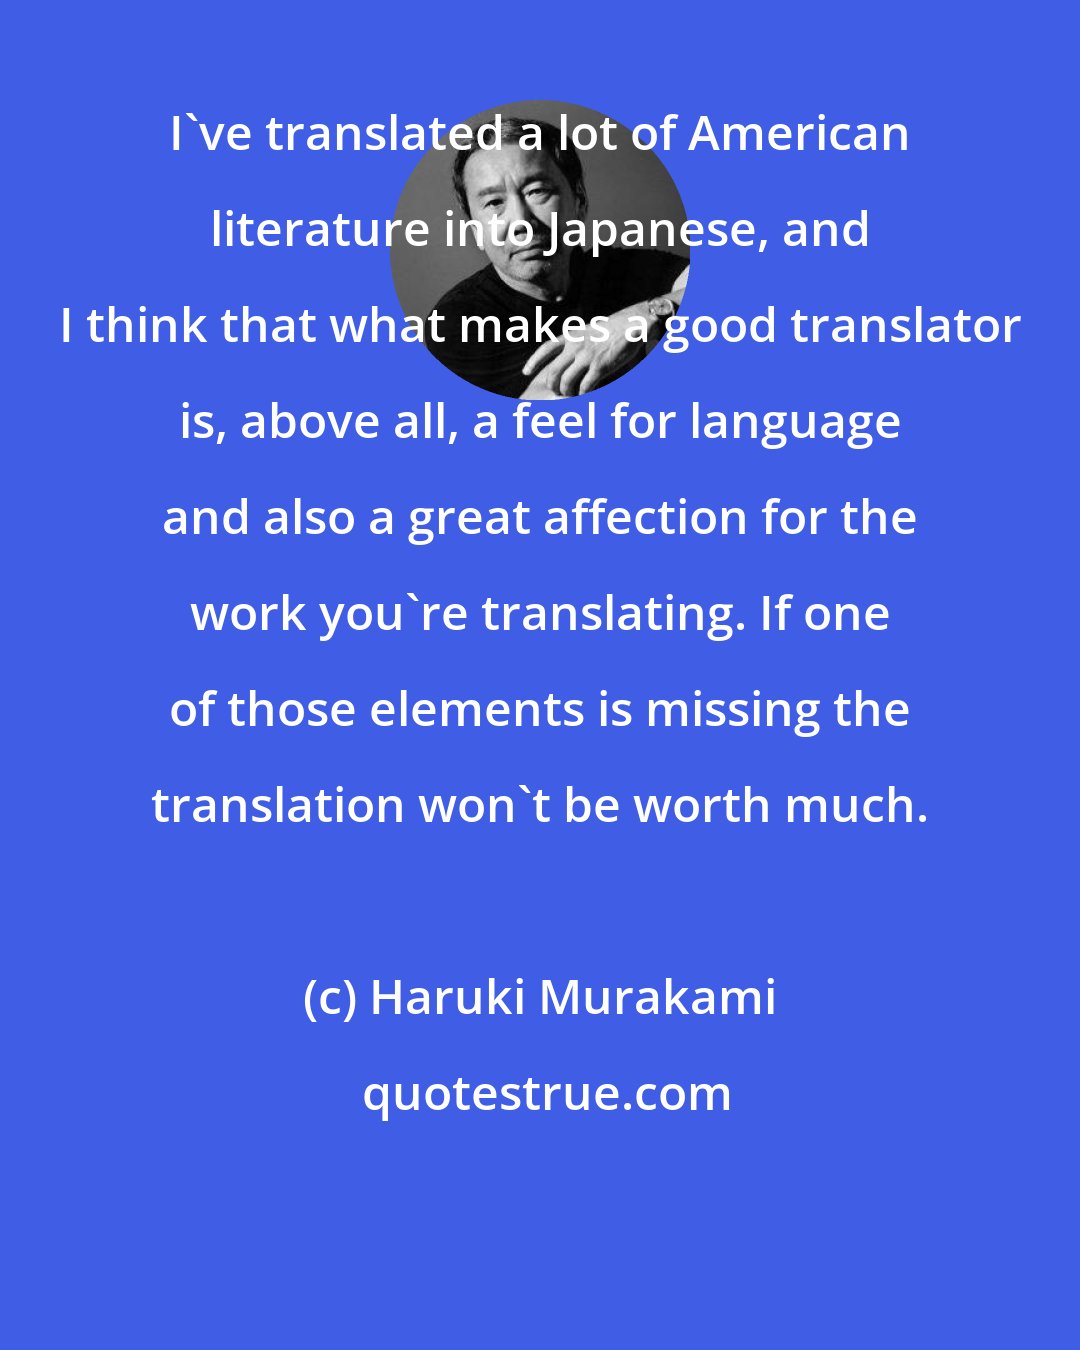 Haruki Murakami: I've translated a lot of American literature into Japanese, and I think that what makes a good translator is, above all, a feel for language and also a great affection for the work you're translating. If one of those elements is missing the translation won't be worth much.